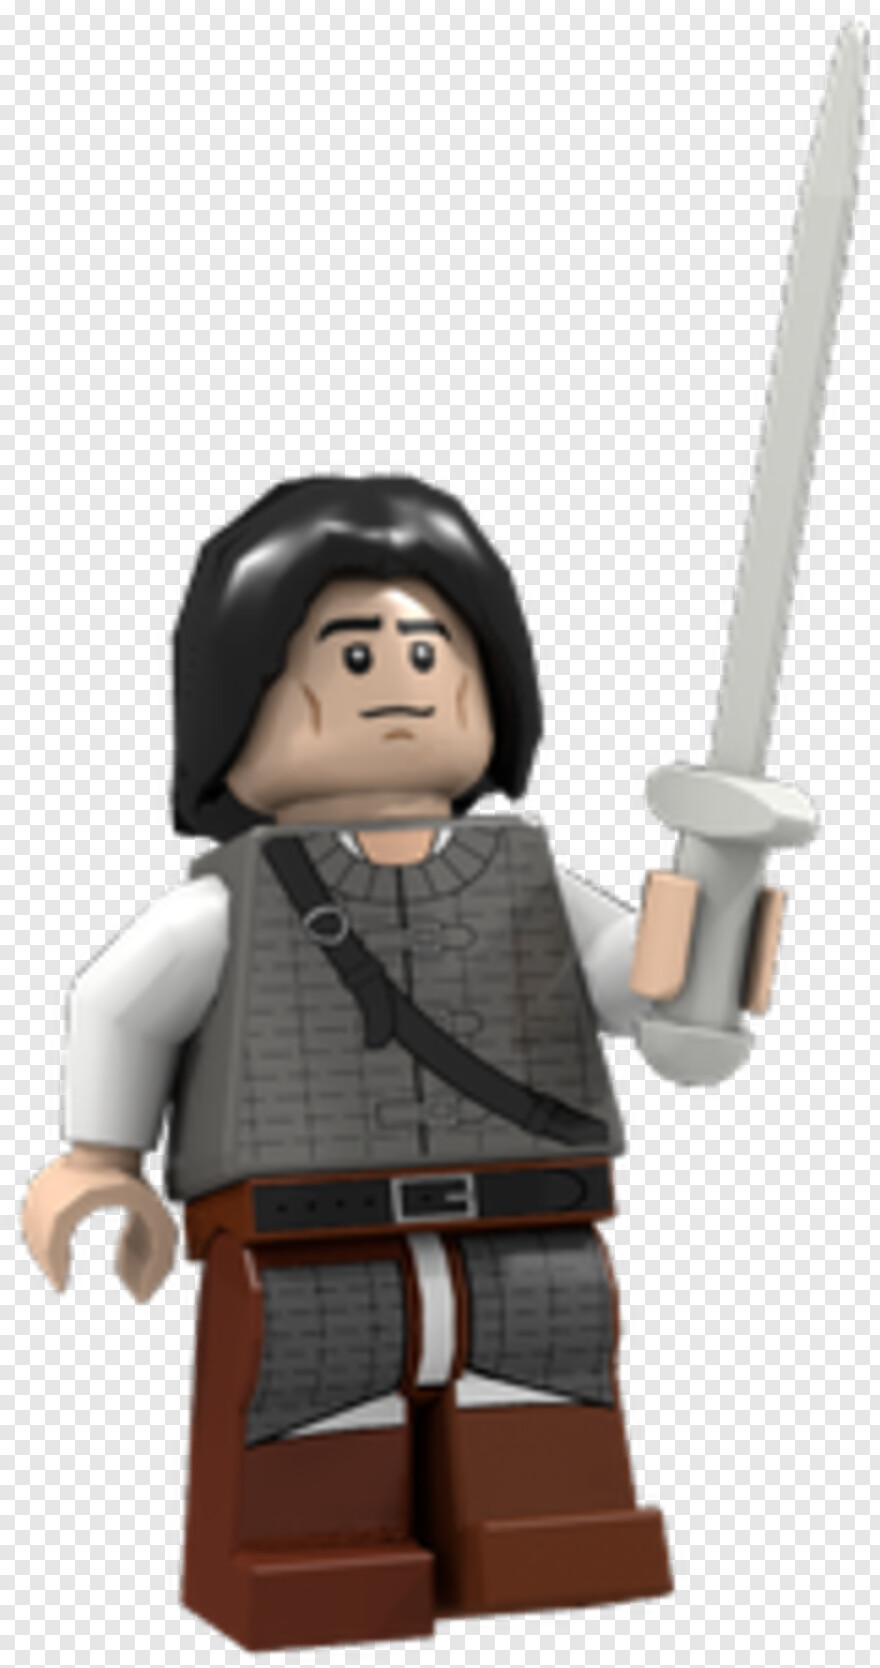 roblox-character # 402847